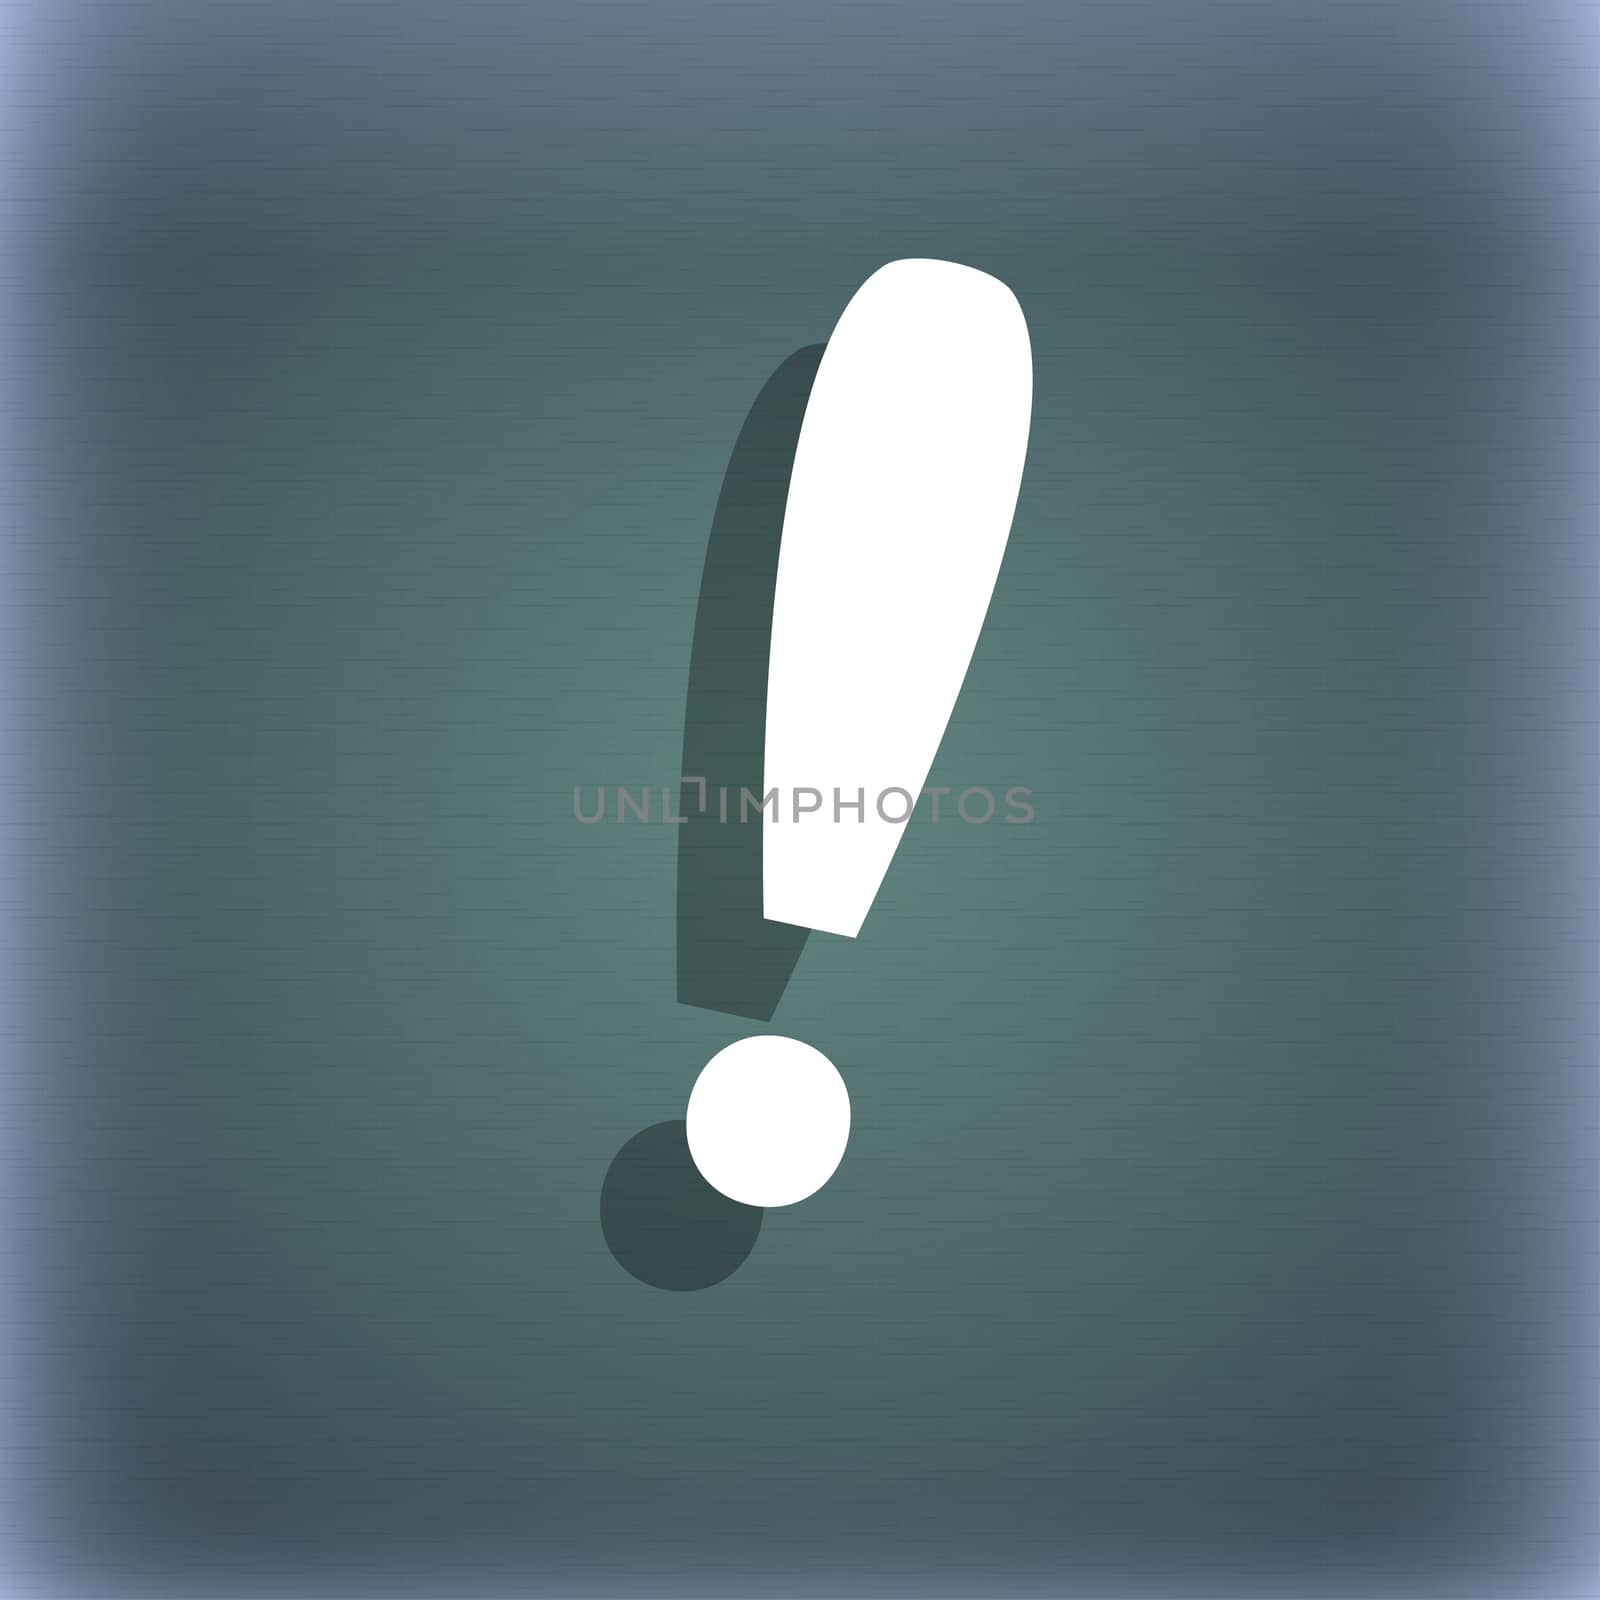 Exclamation mark sign icon. Attention speech bubble symbol. On the blue-green abstract background with shadow and space for your text.  by serhii_lohvyniuk